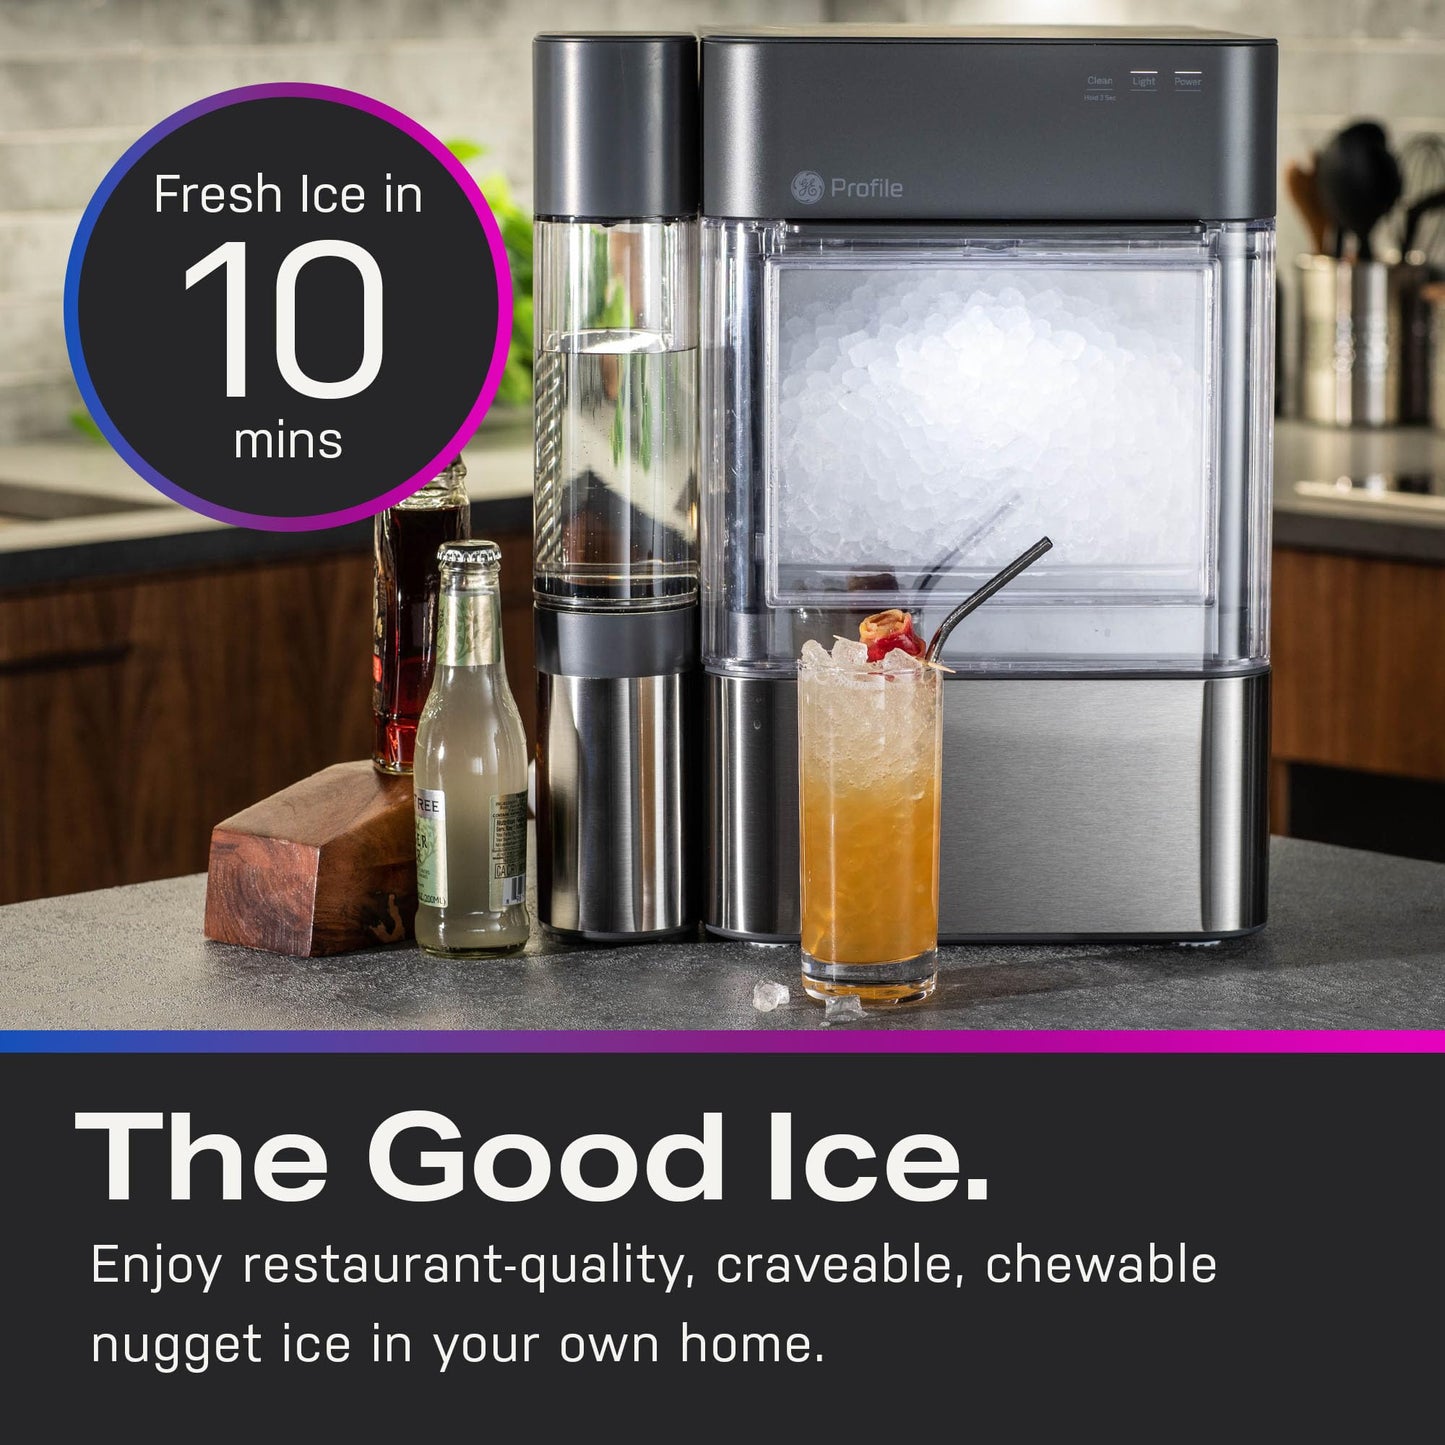 GE Profile Opal 2.0 XL with 1 Gallon Tank, Chewable Crunchable Countertop Nugget Ice Maker, Scoop included, 38 lbs in 24 hours